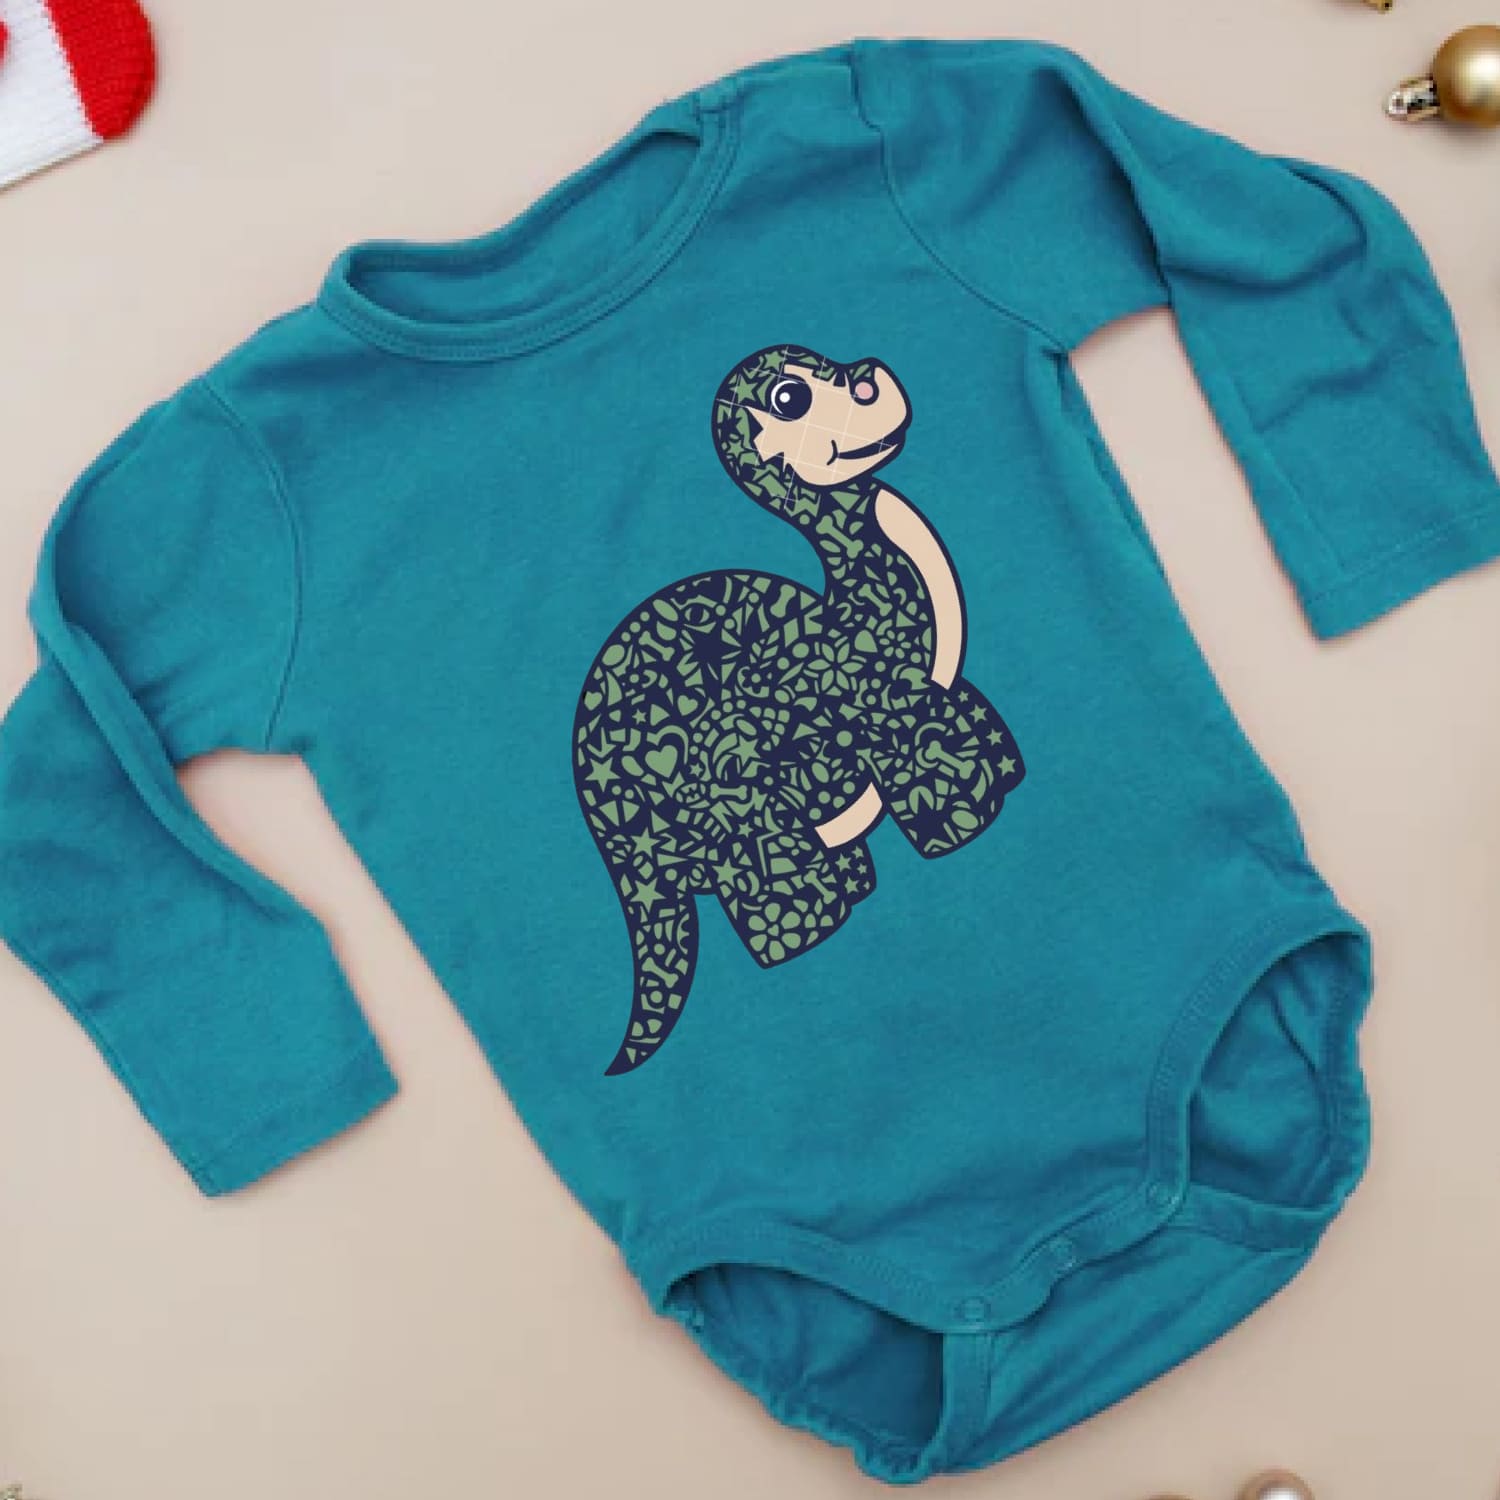 Baby bodysuit with a turtle on it.